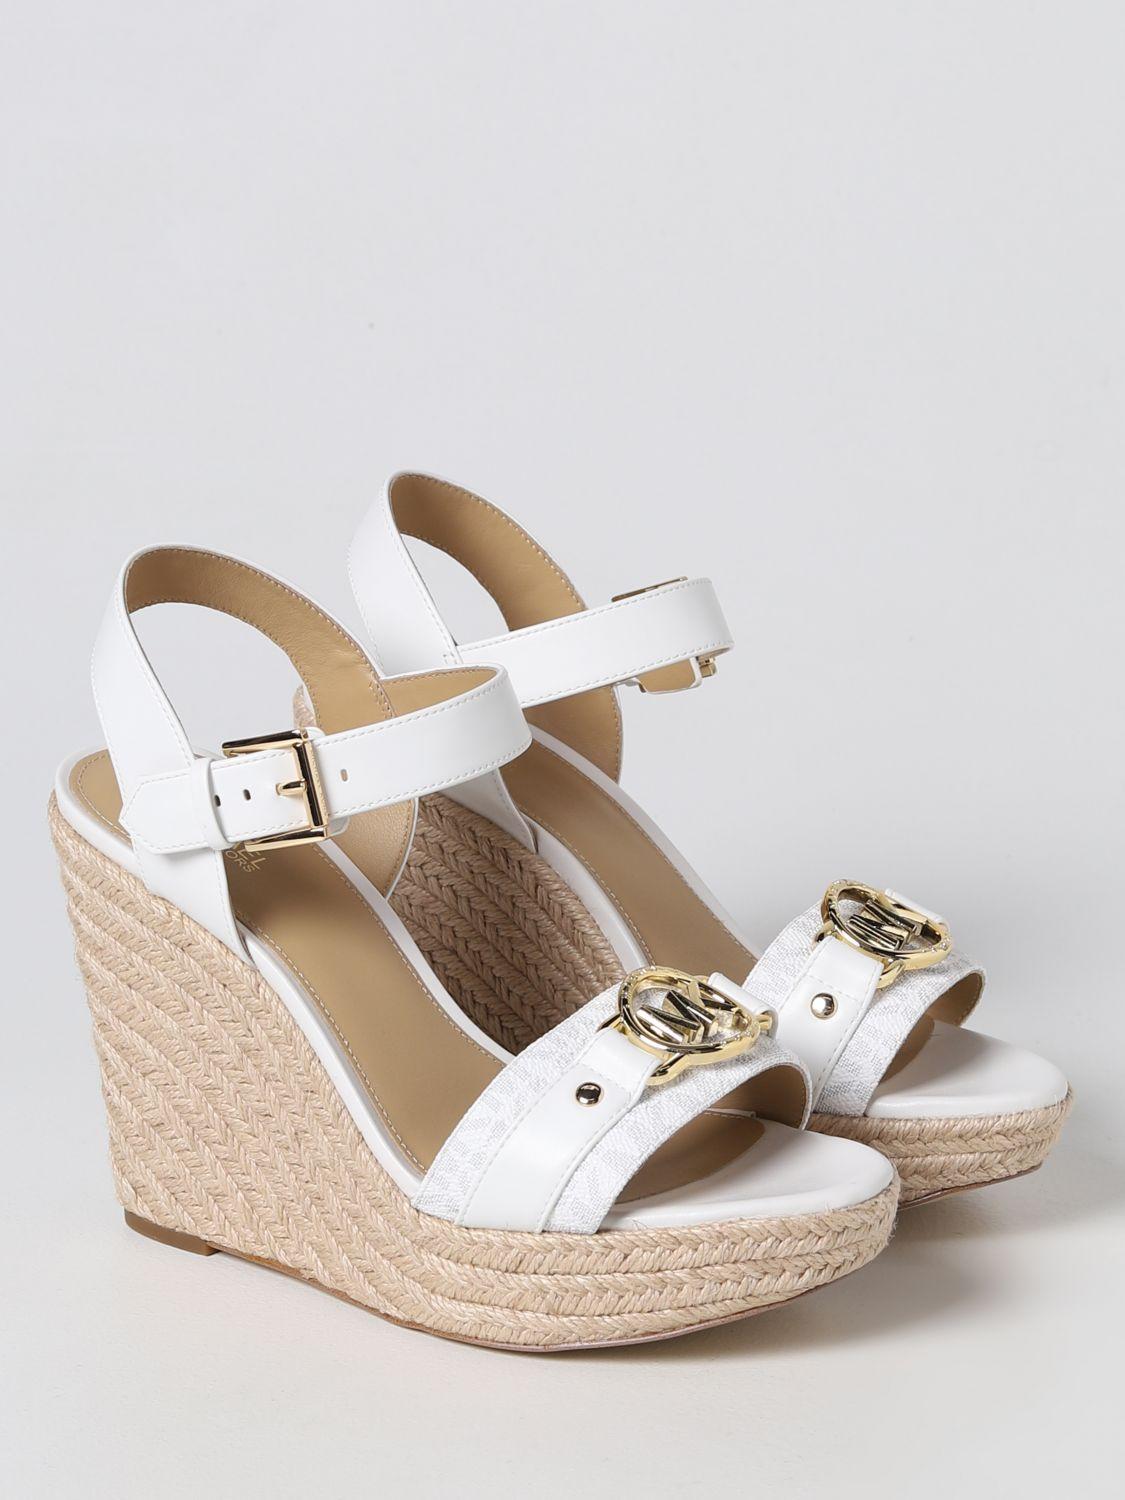 Michael Kors Wedge Shoes in Natural | Lyst